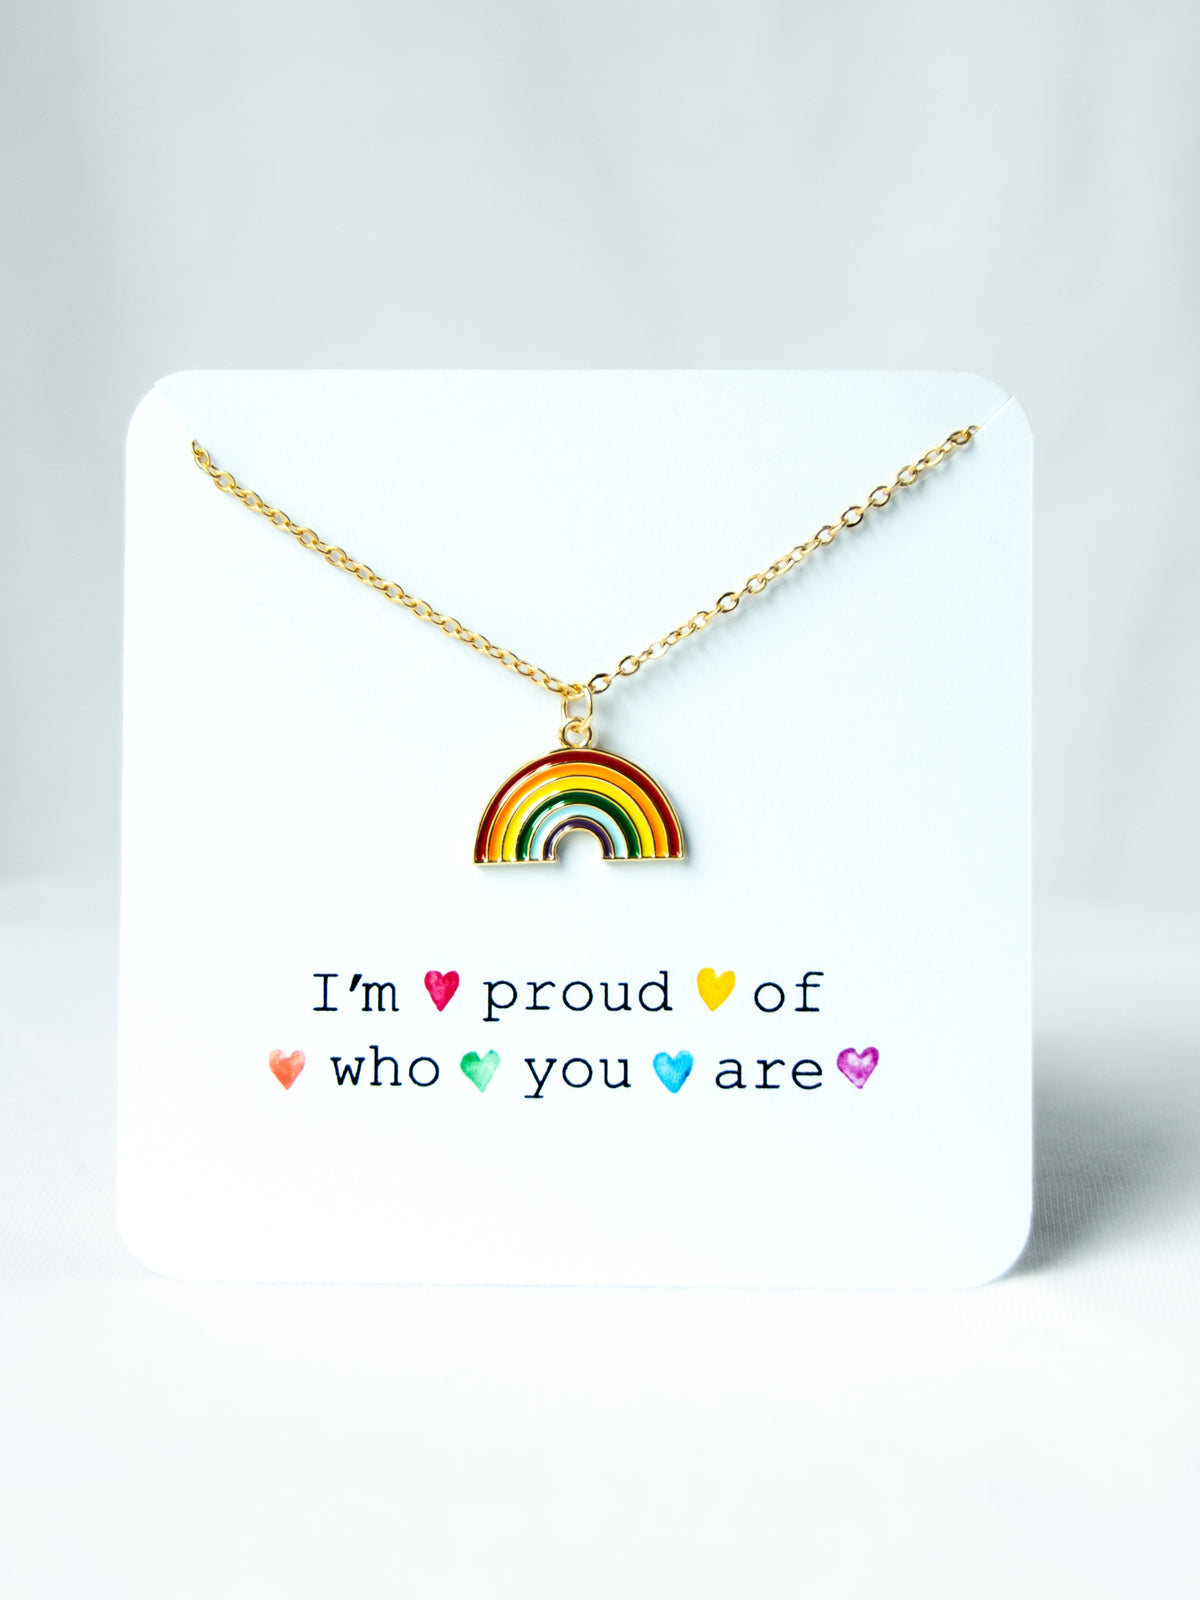 I'm proud of who you are rainbow charm necklace